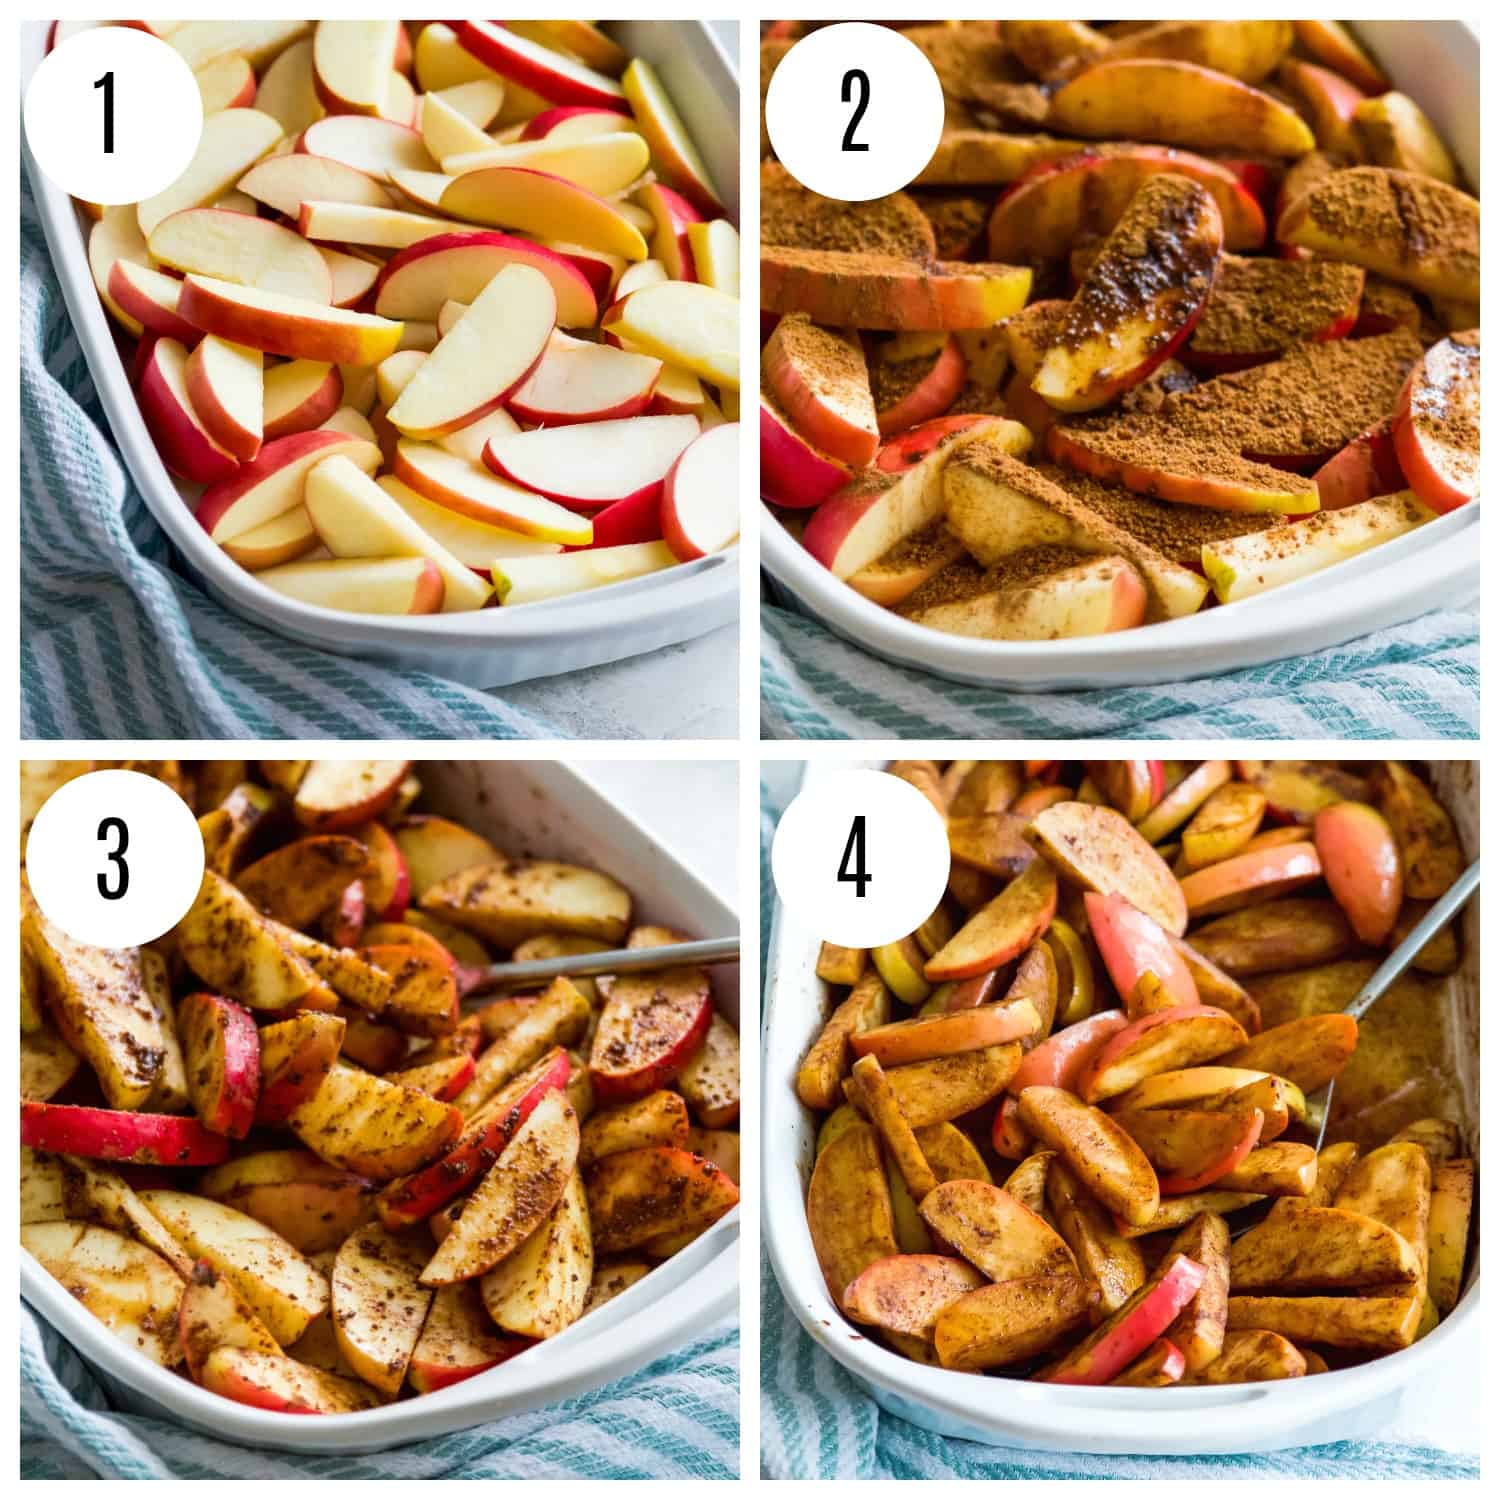 Step by step directions for making baked apple slices with a cinnamon sugar coating.  